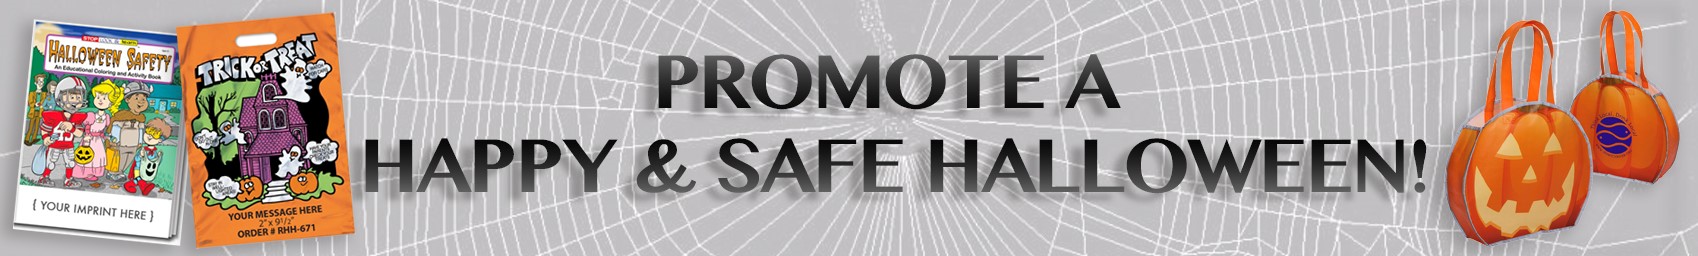 Promote a Happy & Safe Halloween | Promotional Halloween Products & Giveaways | Care Promotions